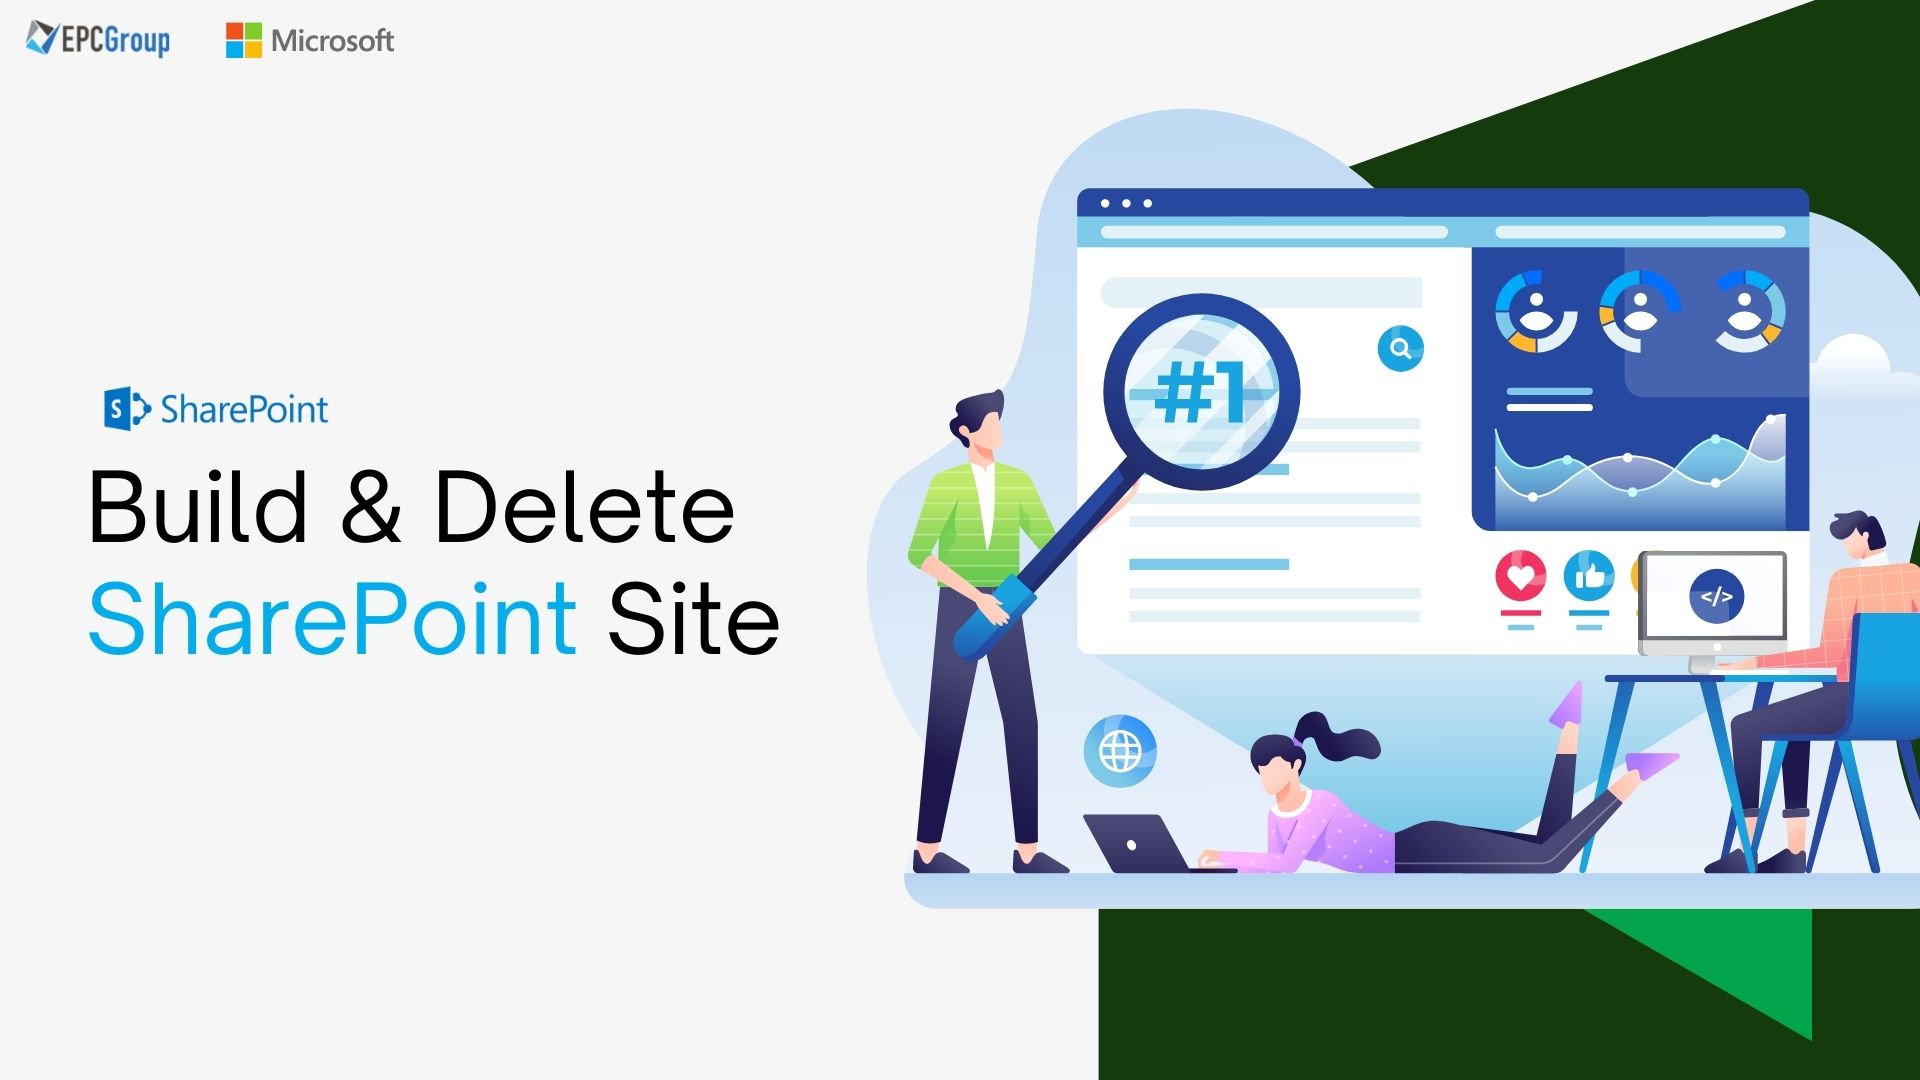 How to Build and Delete a Site in SharePoint